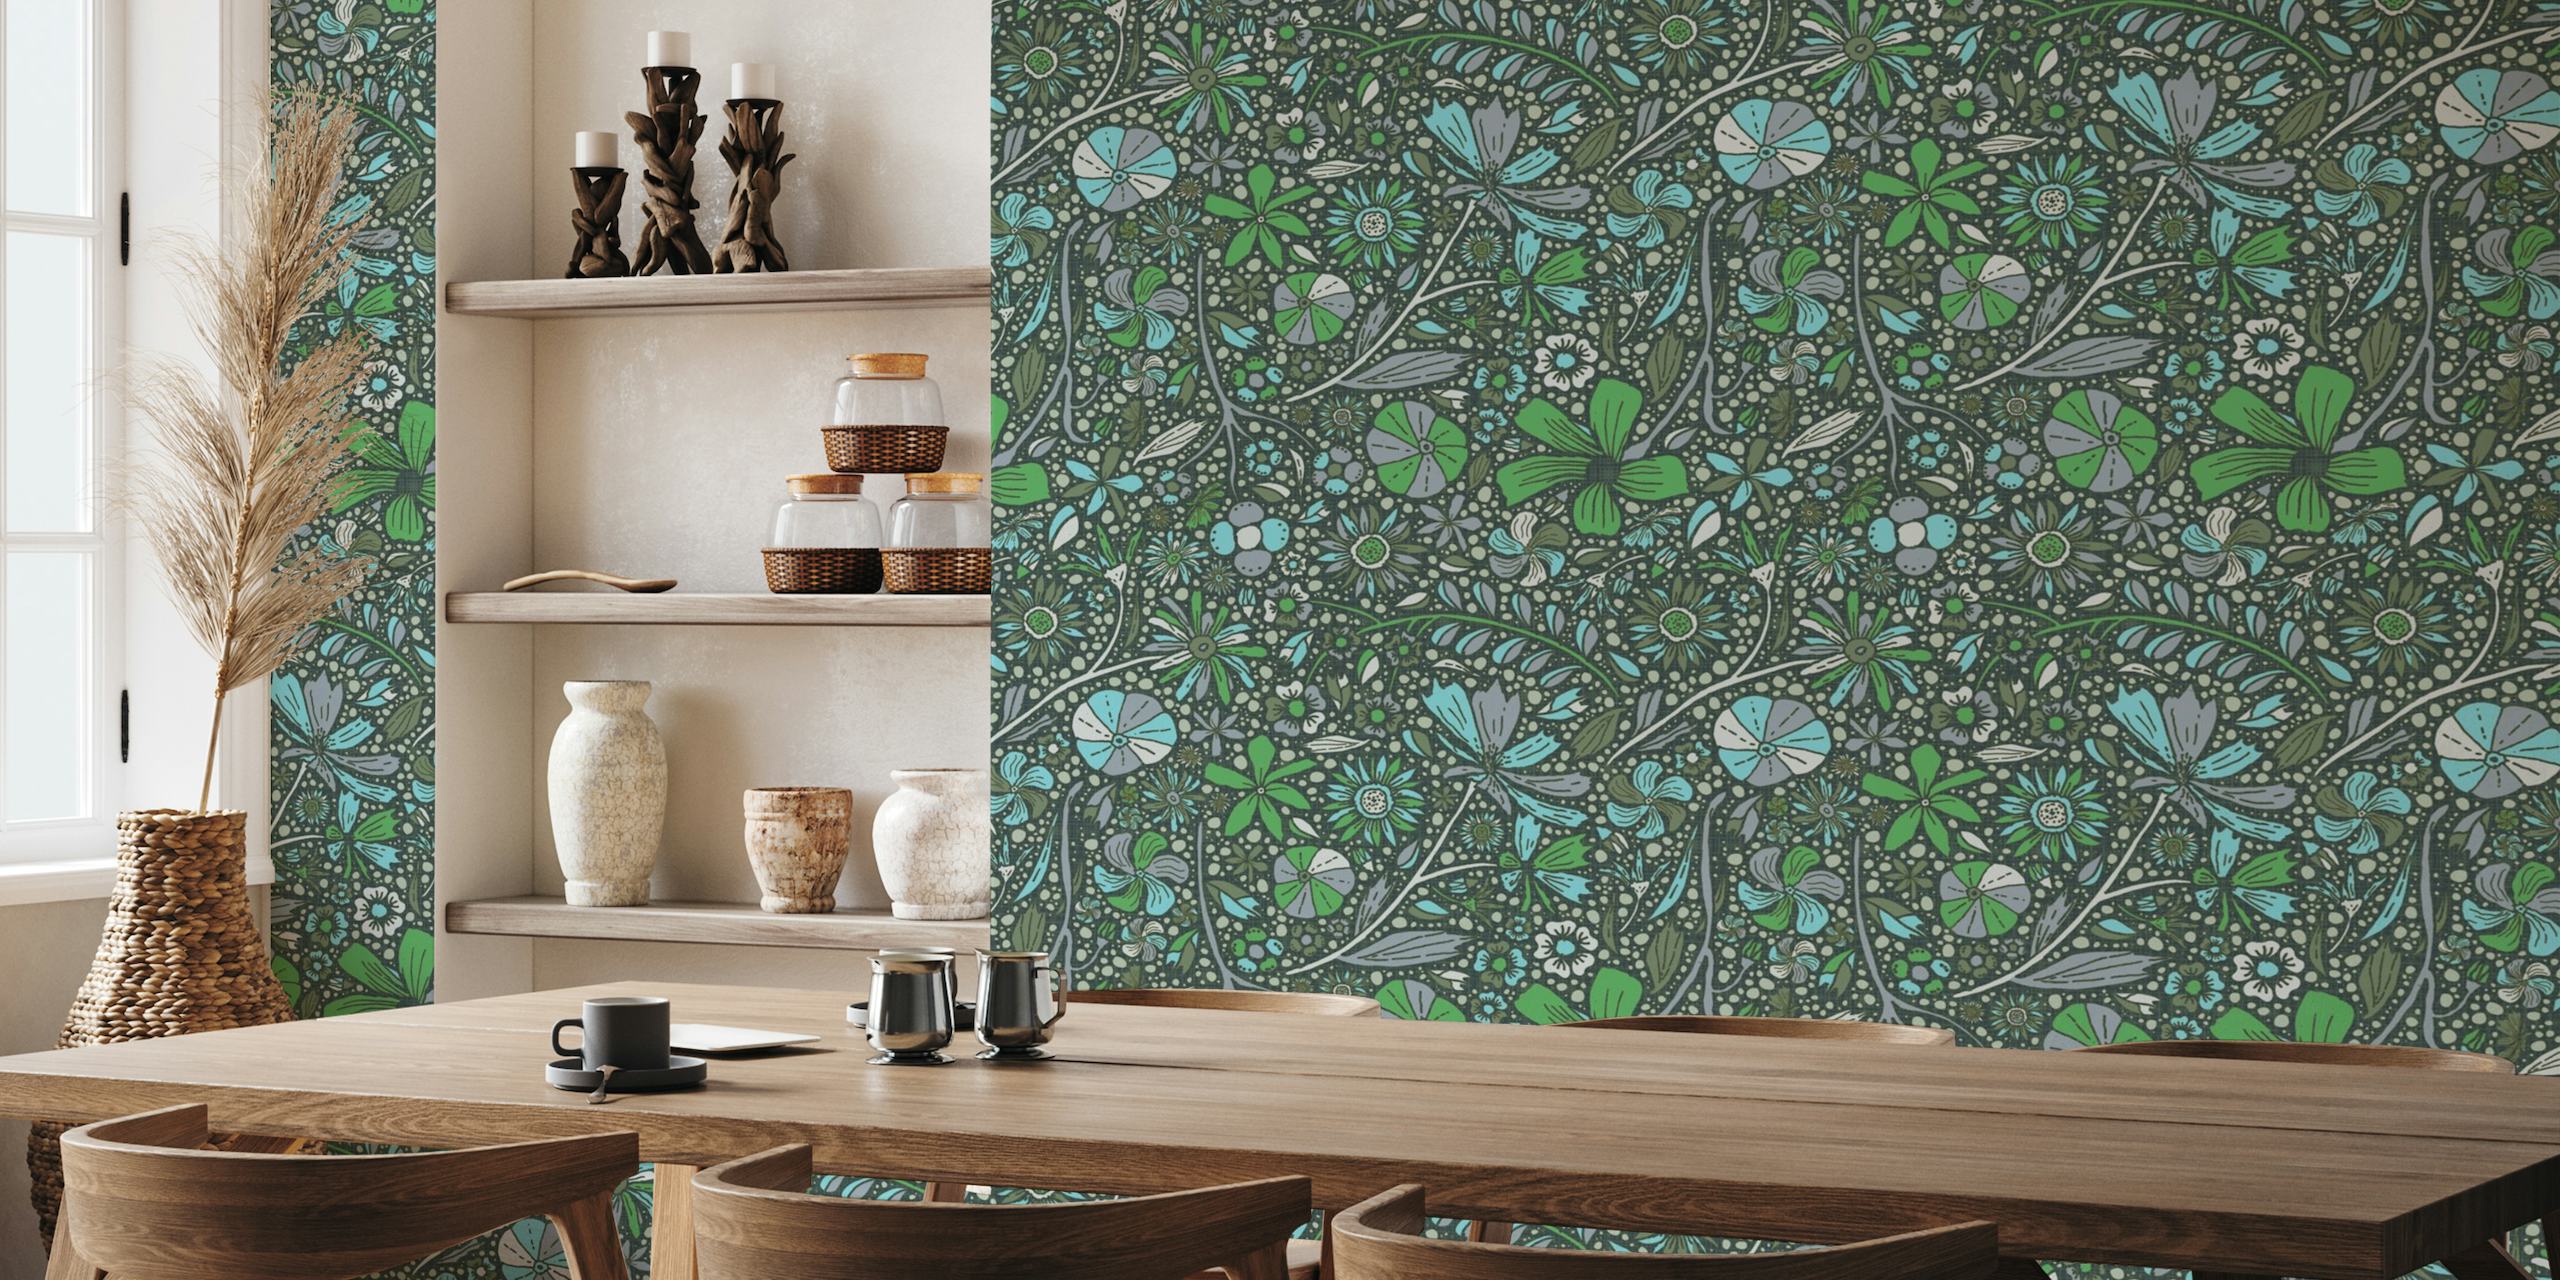 Maximalist bohemian floral pattern blue and teal wallpaper